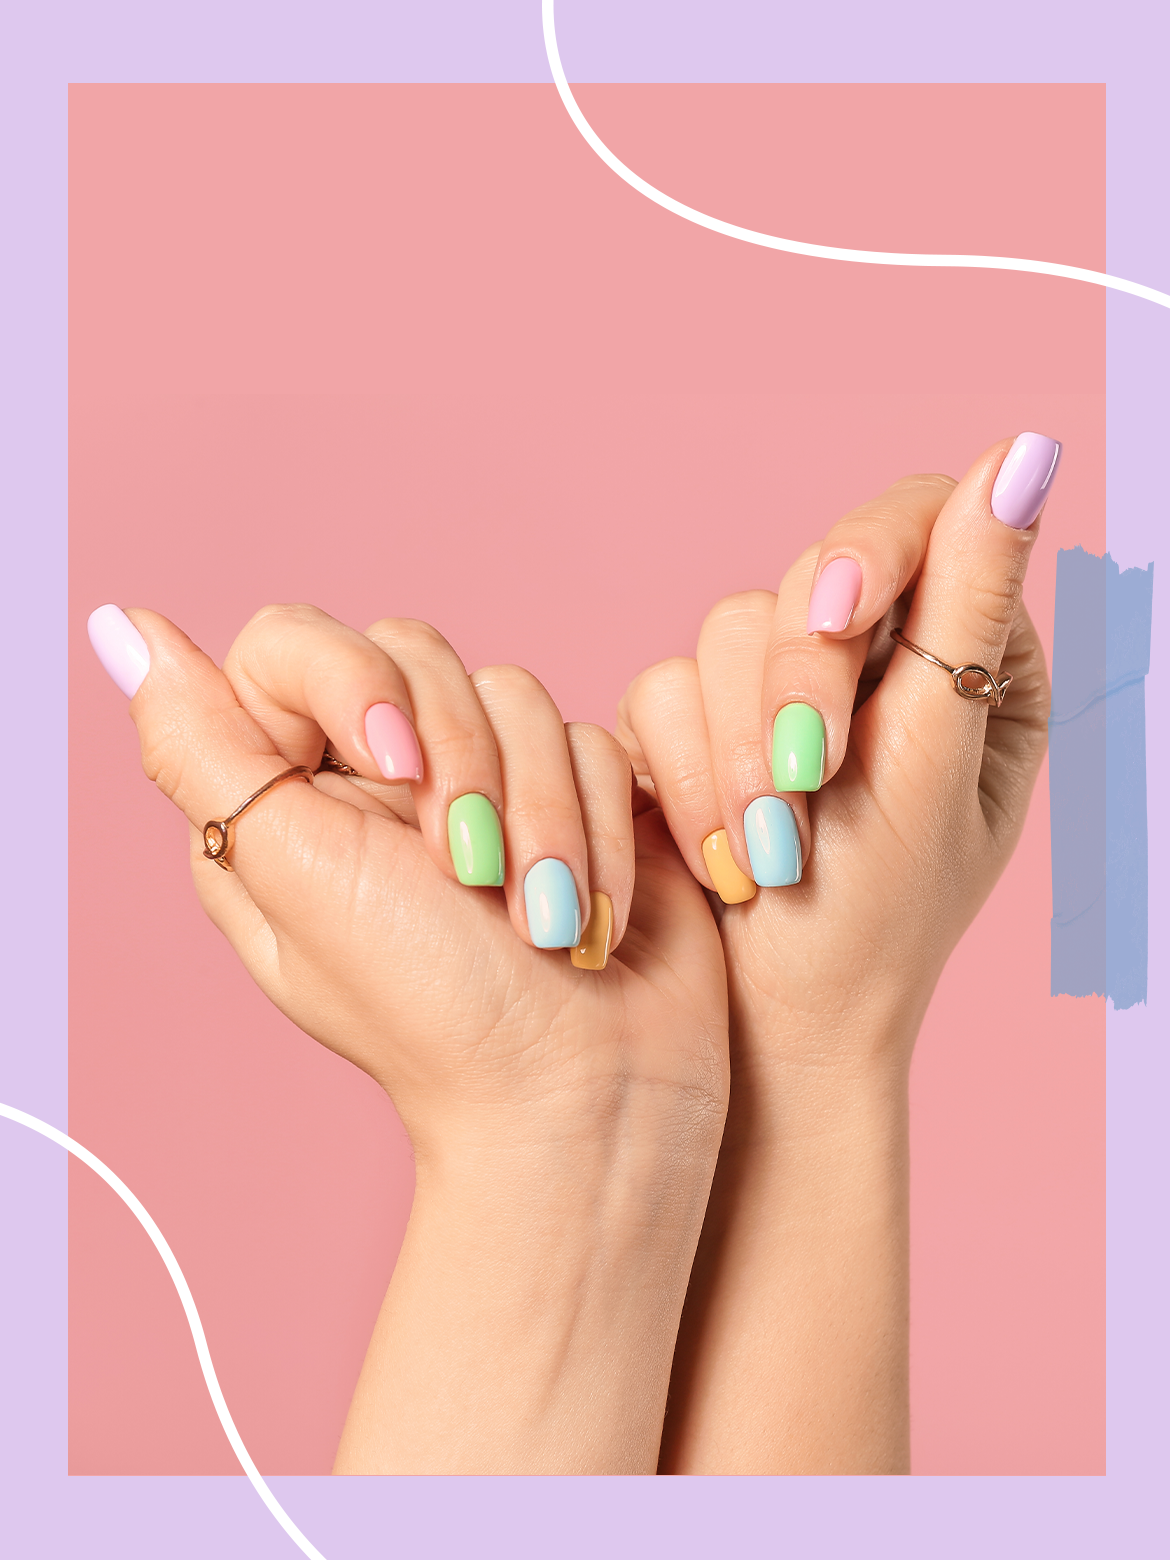 Ombre Nails Game For Girls – Do Your Own Nail Art Design.s in Beauty  Manicure Studio by Stevan Petrovic